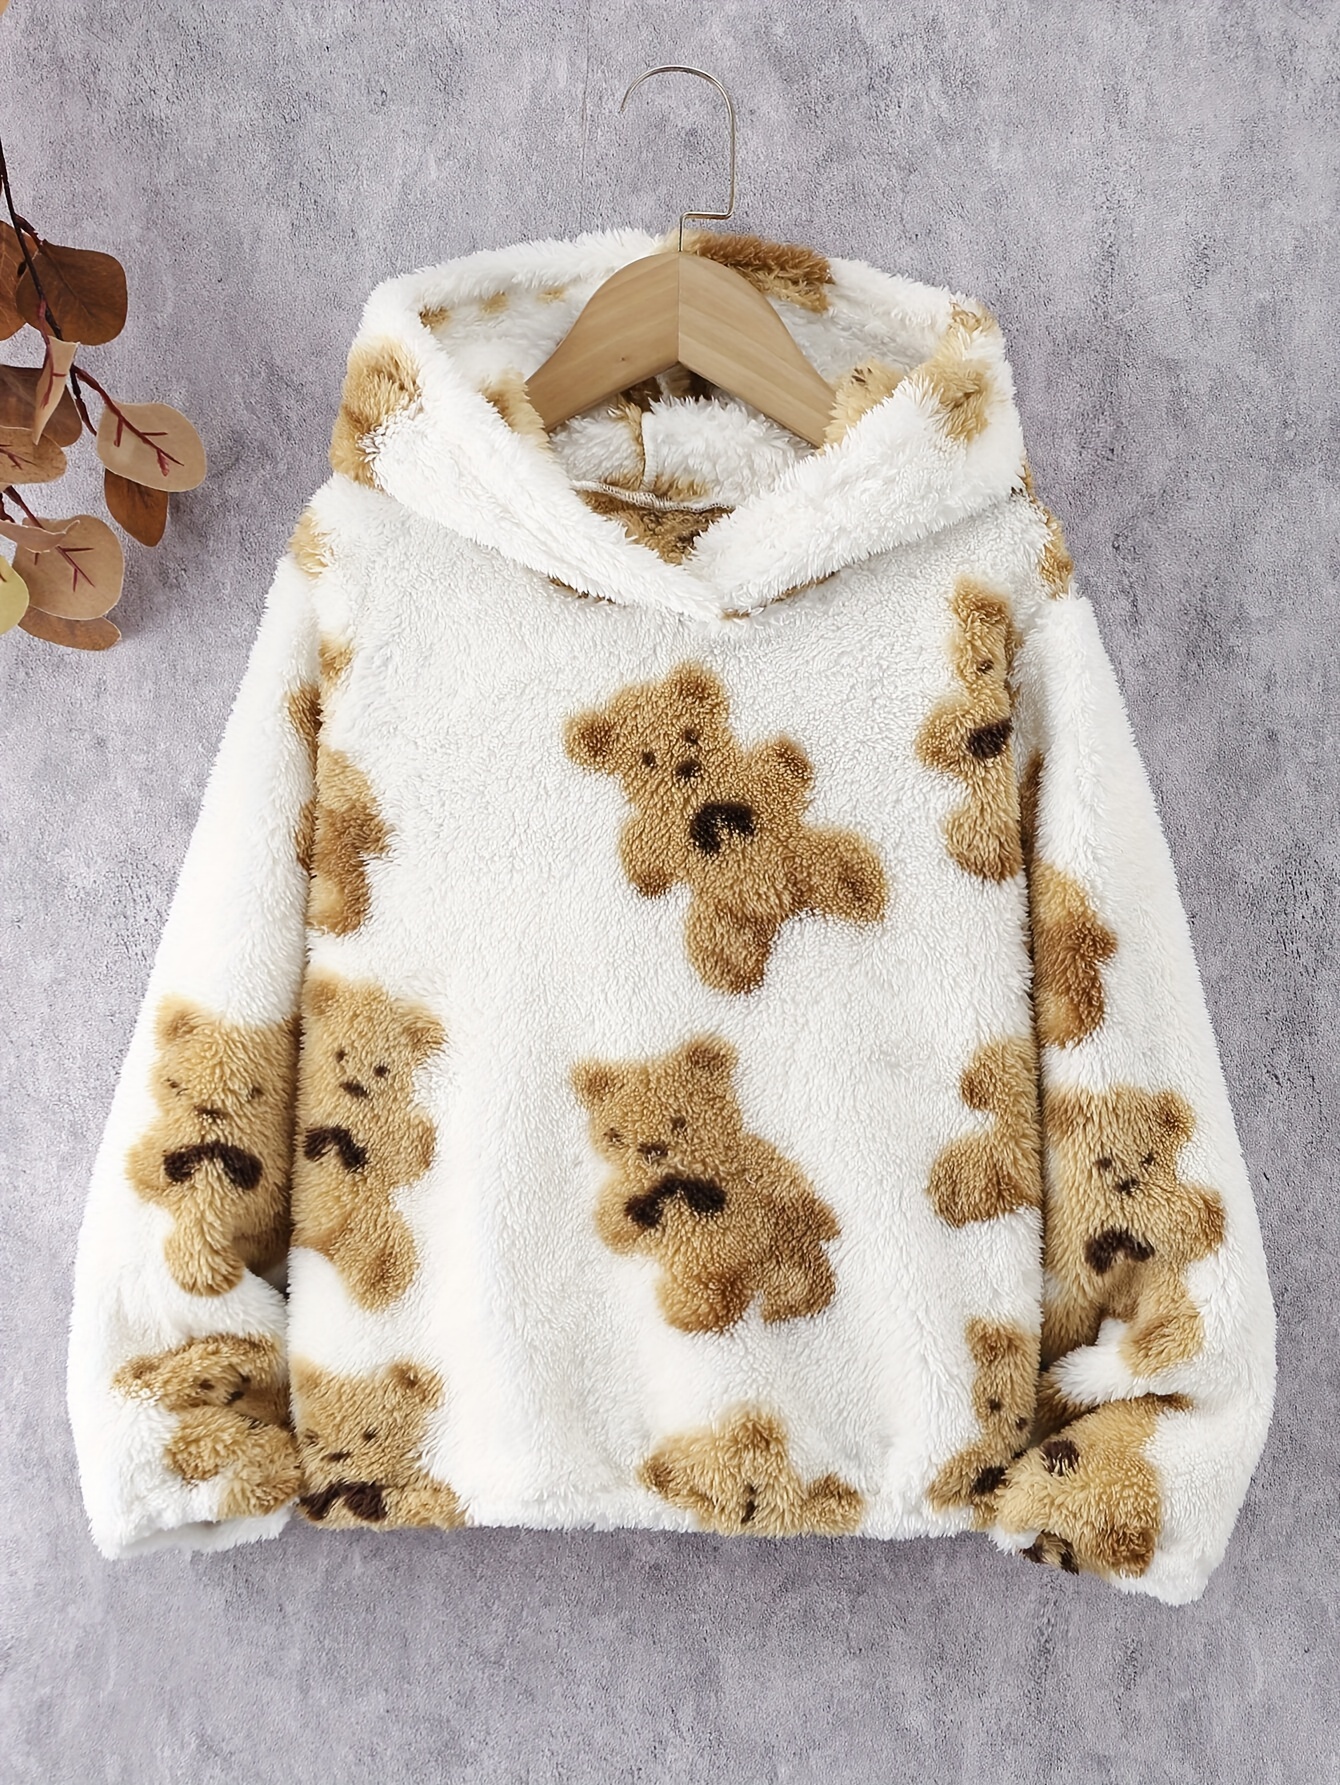 Men's Sweater with Print Monster Teddy Bear, NEW